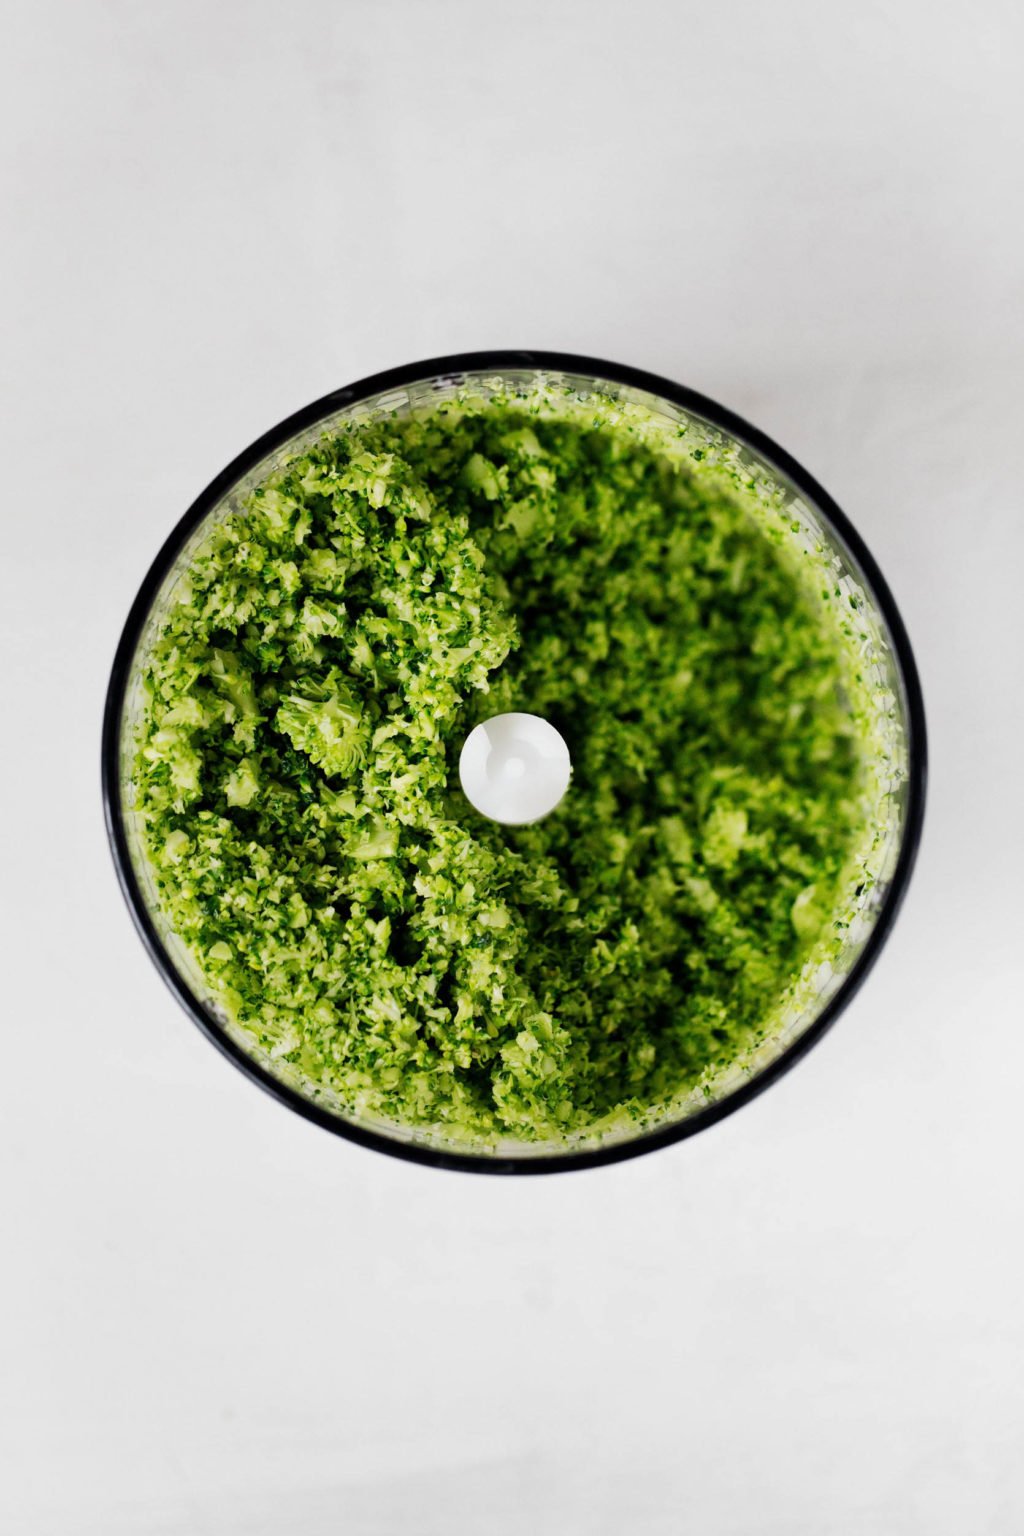 The bowl of a food processor is filled with chopped, lightly steamed green vegetables.